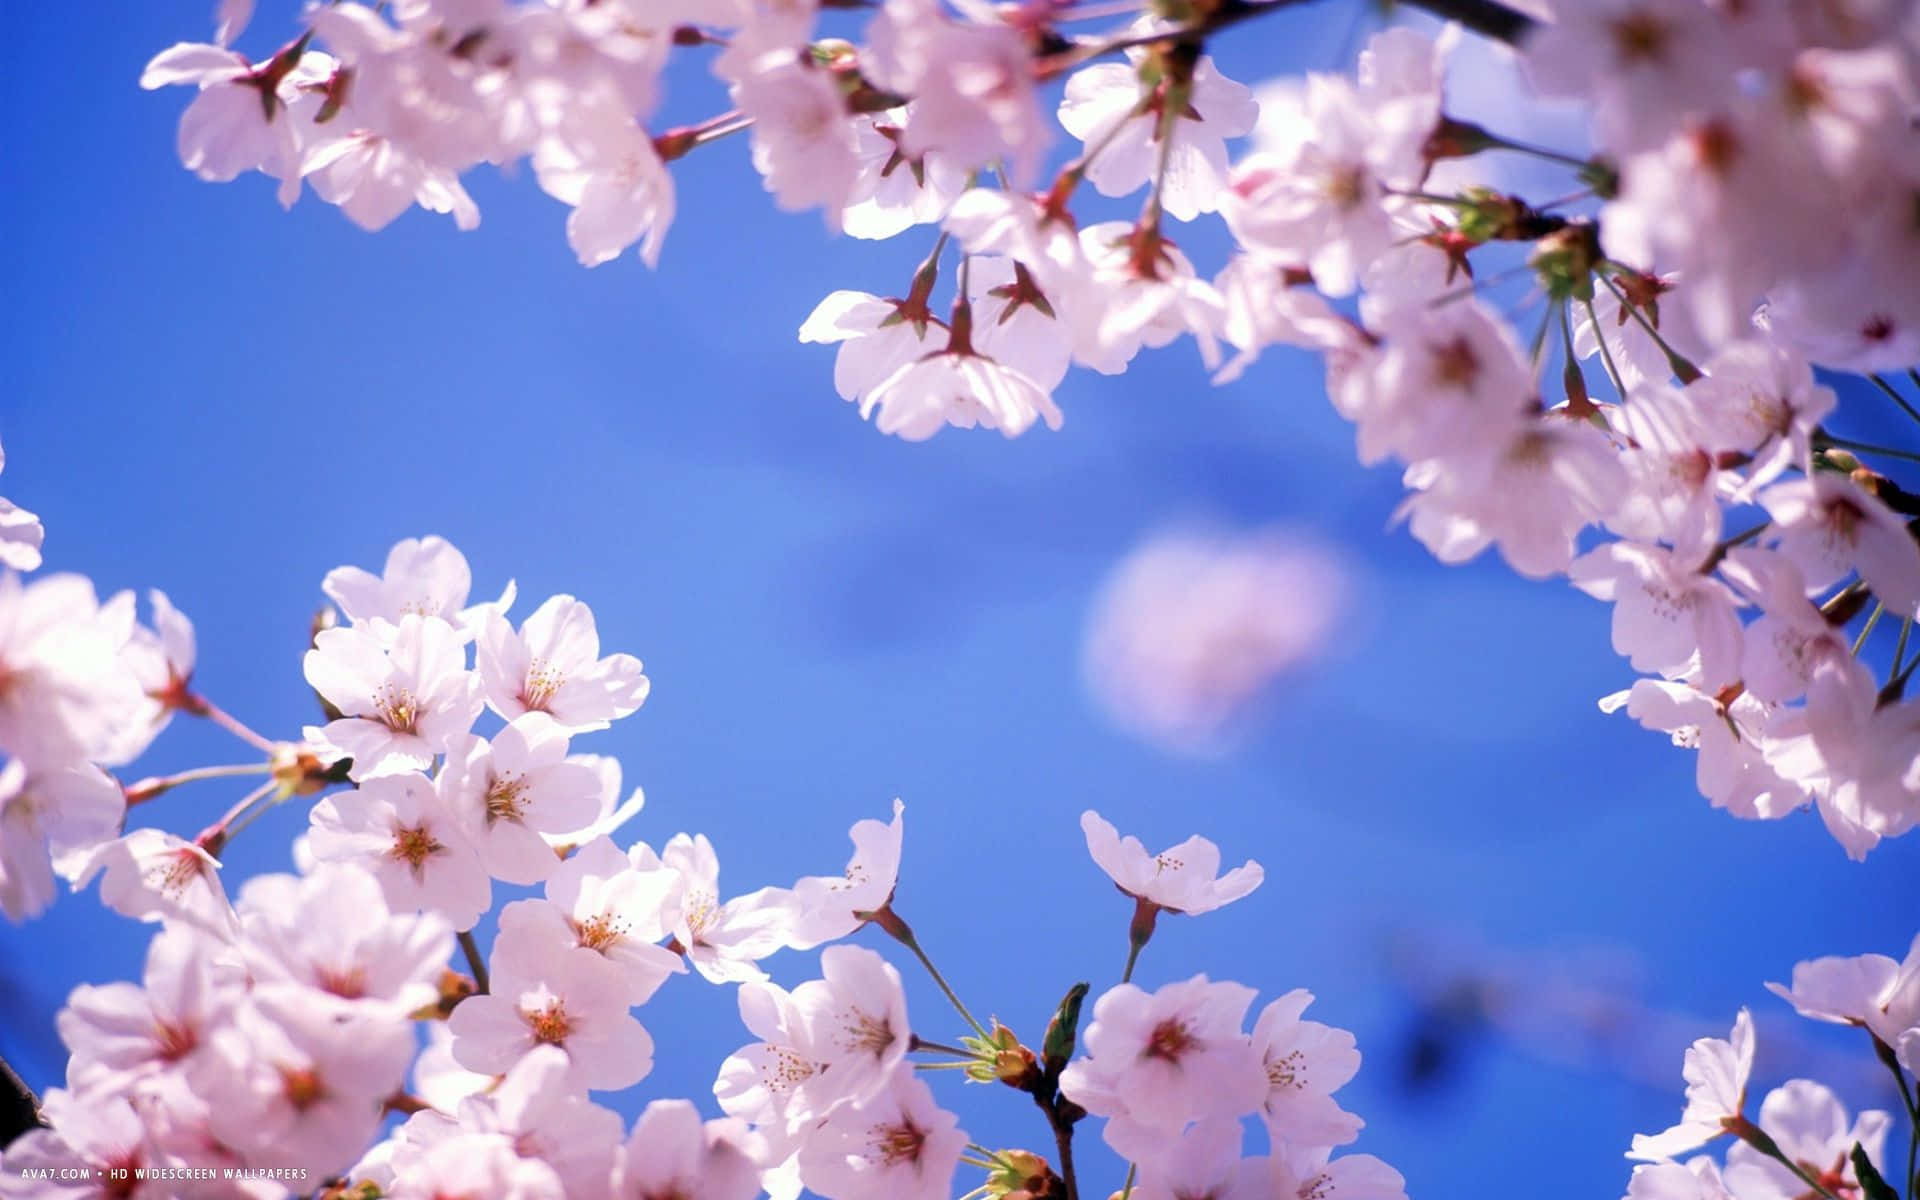 The picturesque beauty of a cherry blossom tree in full bloom. Wallpaper